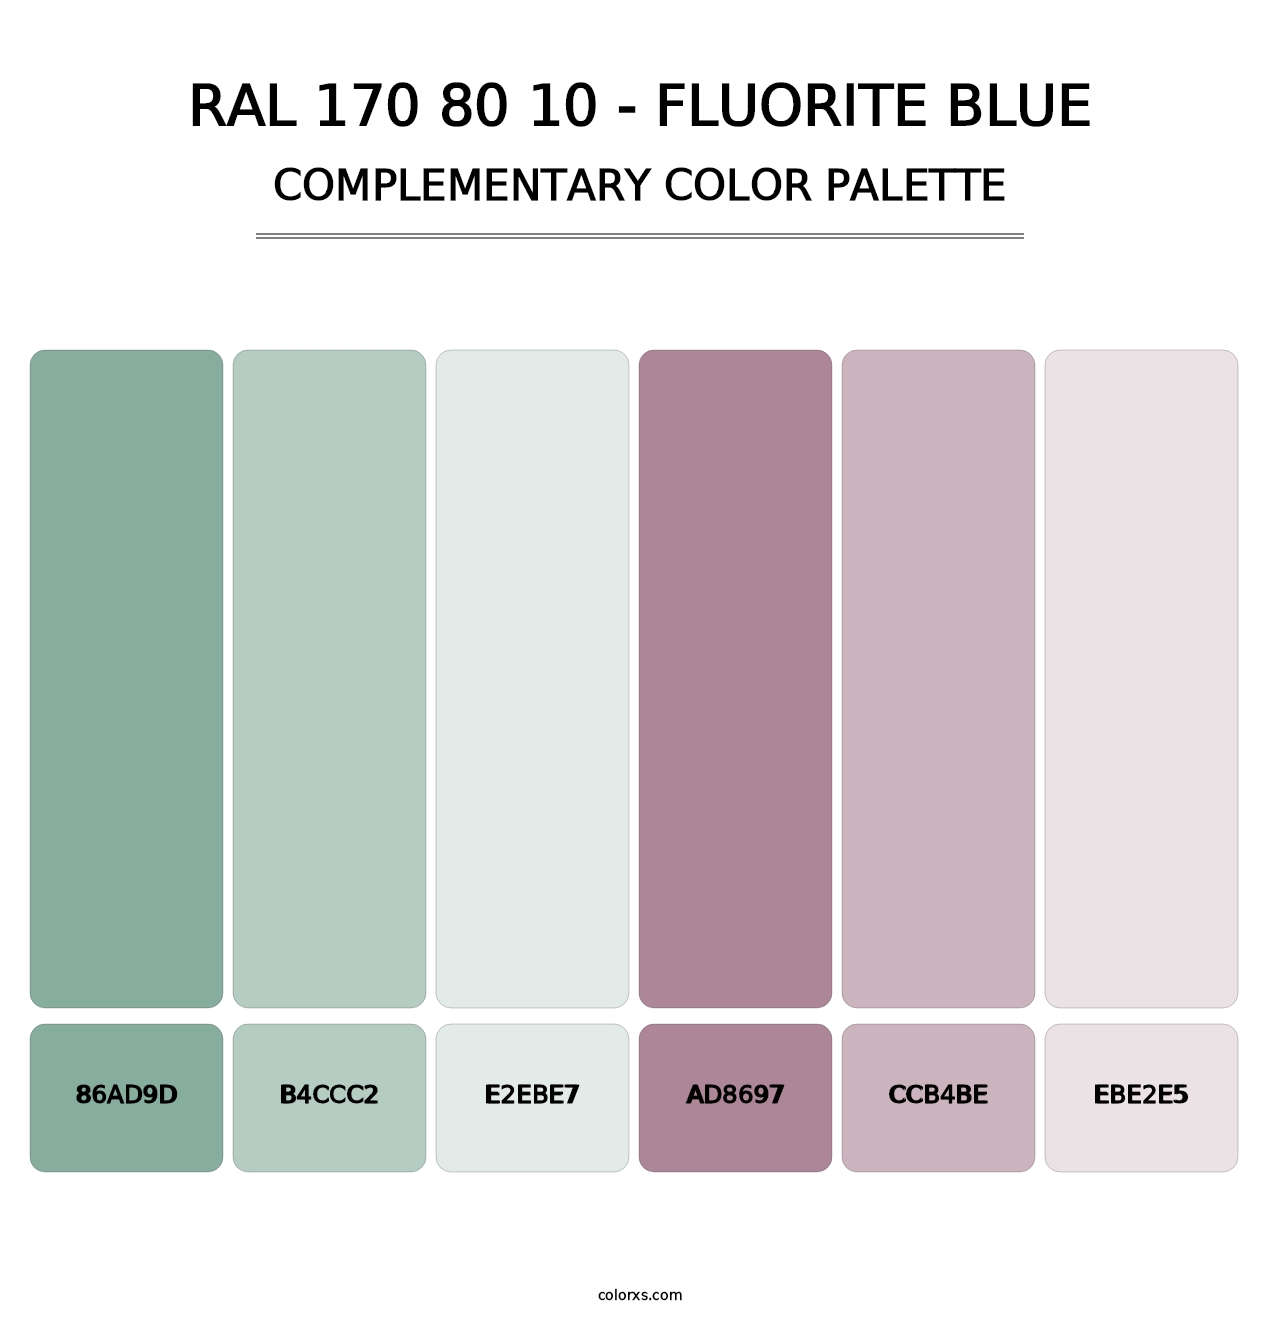 RAL 170 80 10 - Fluorite Blue - Complementary Color Palette